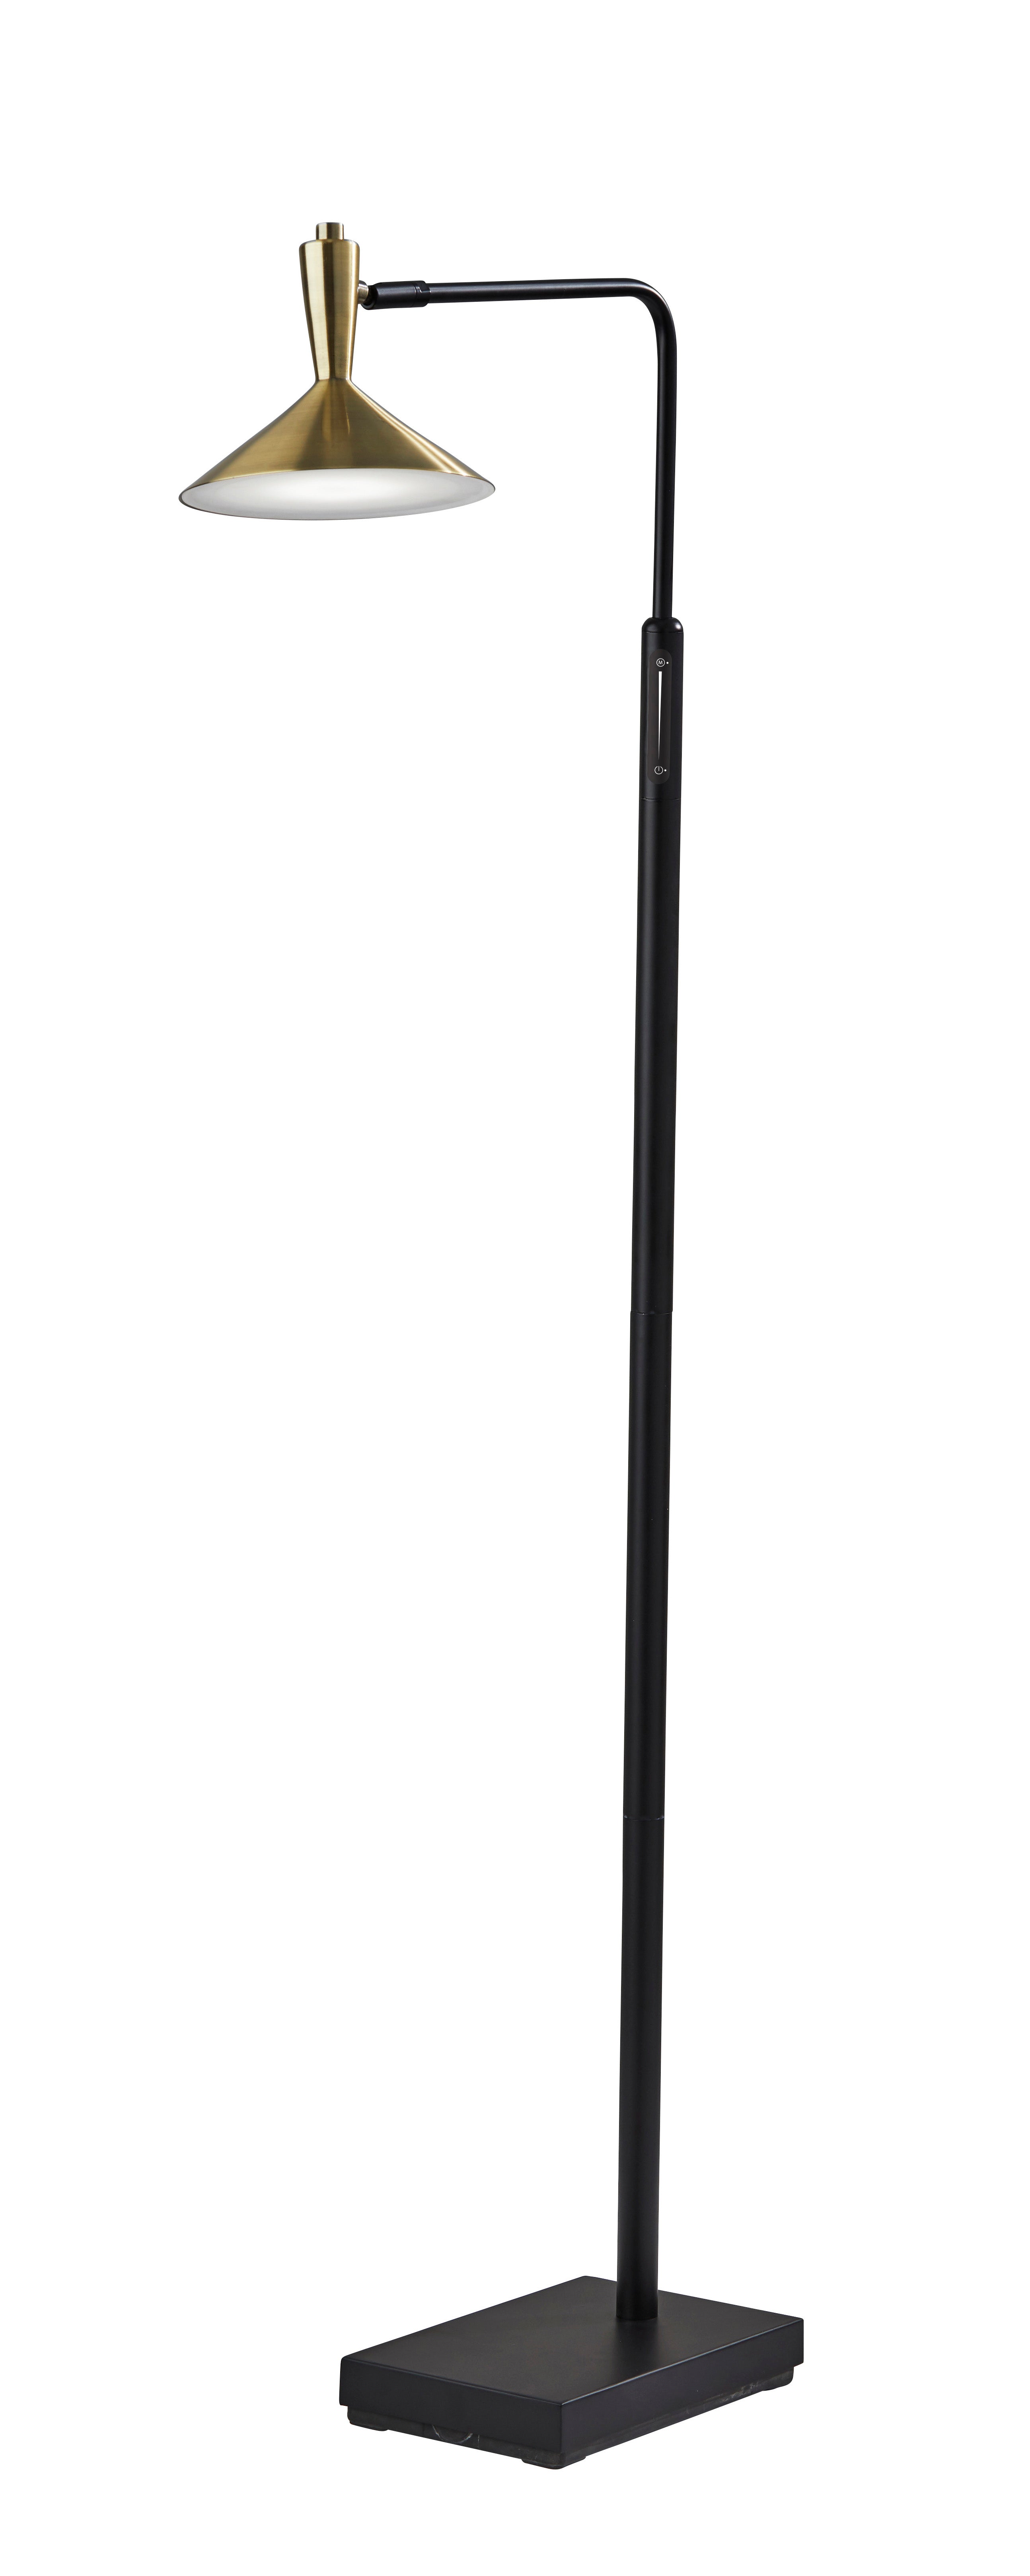 LUCAS Floor lamp Black, Gold INTEGRATED LED - 4263-01 | ADESSO